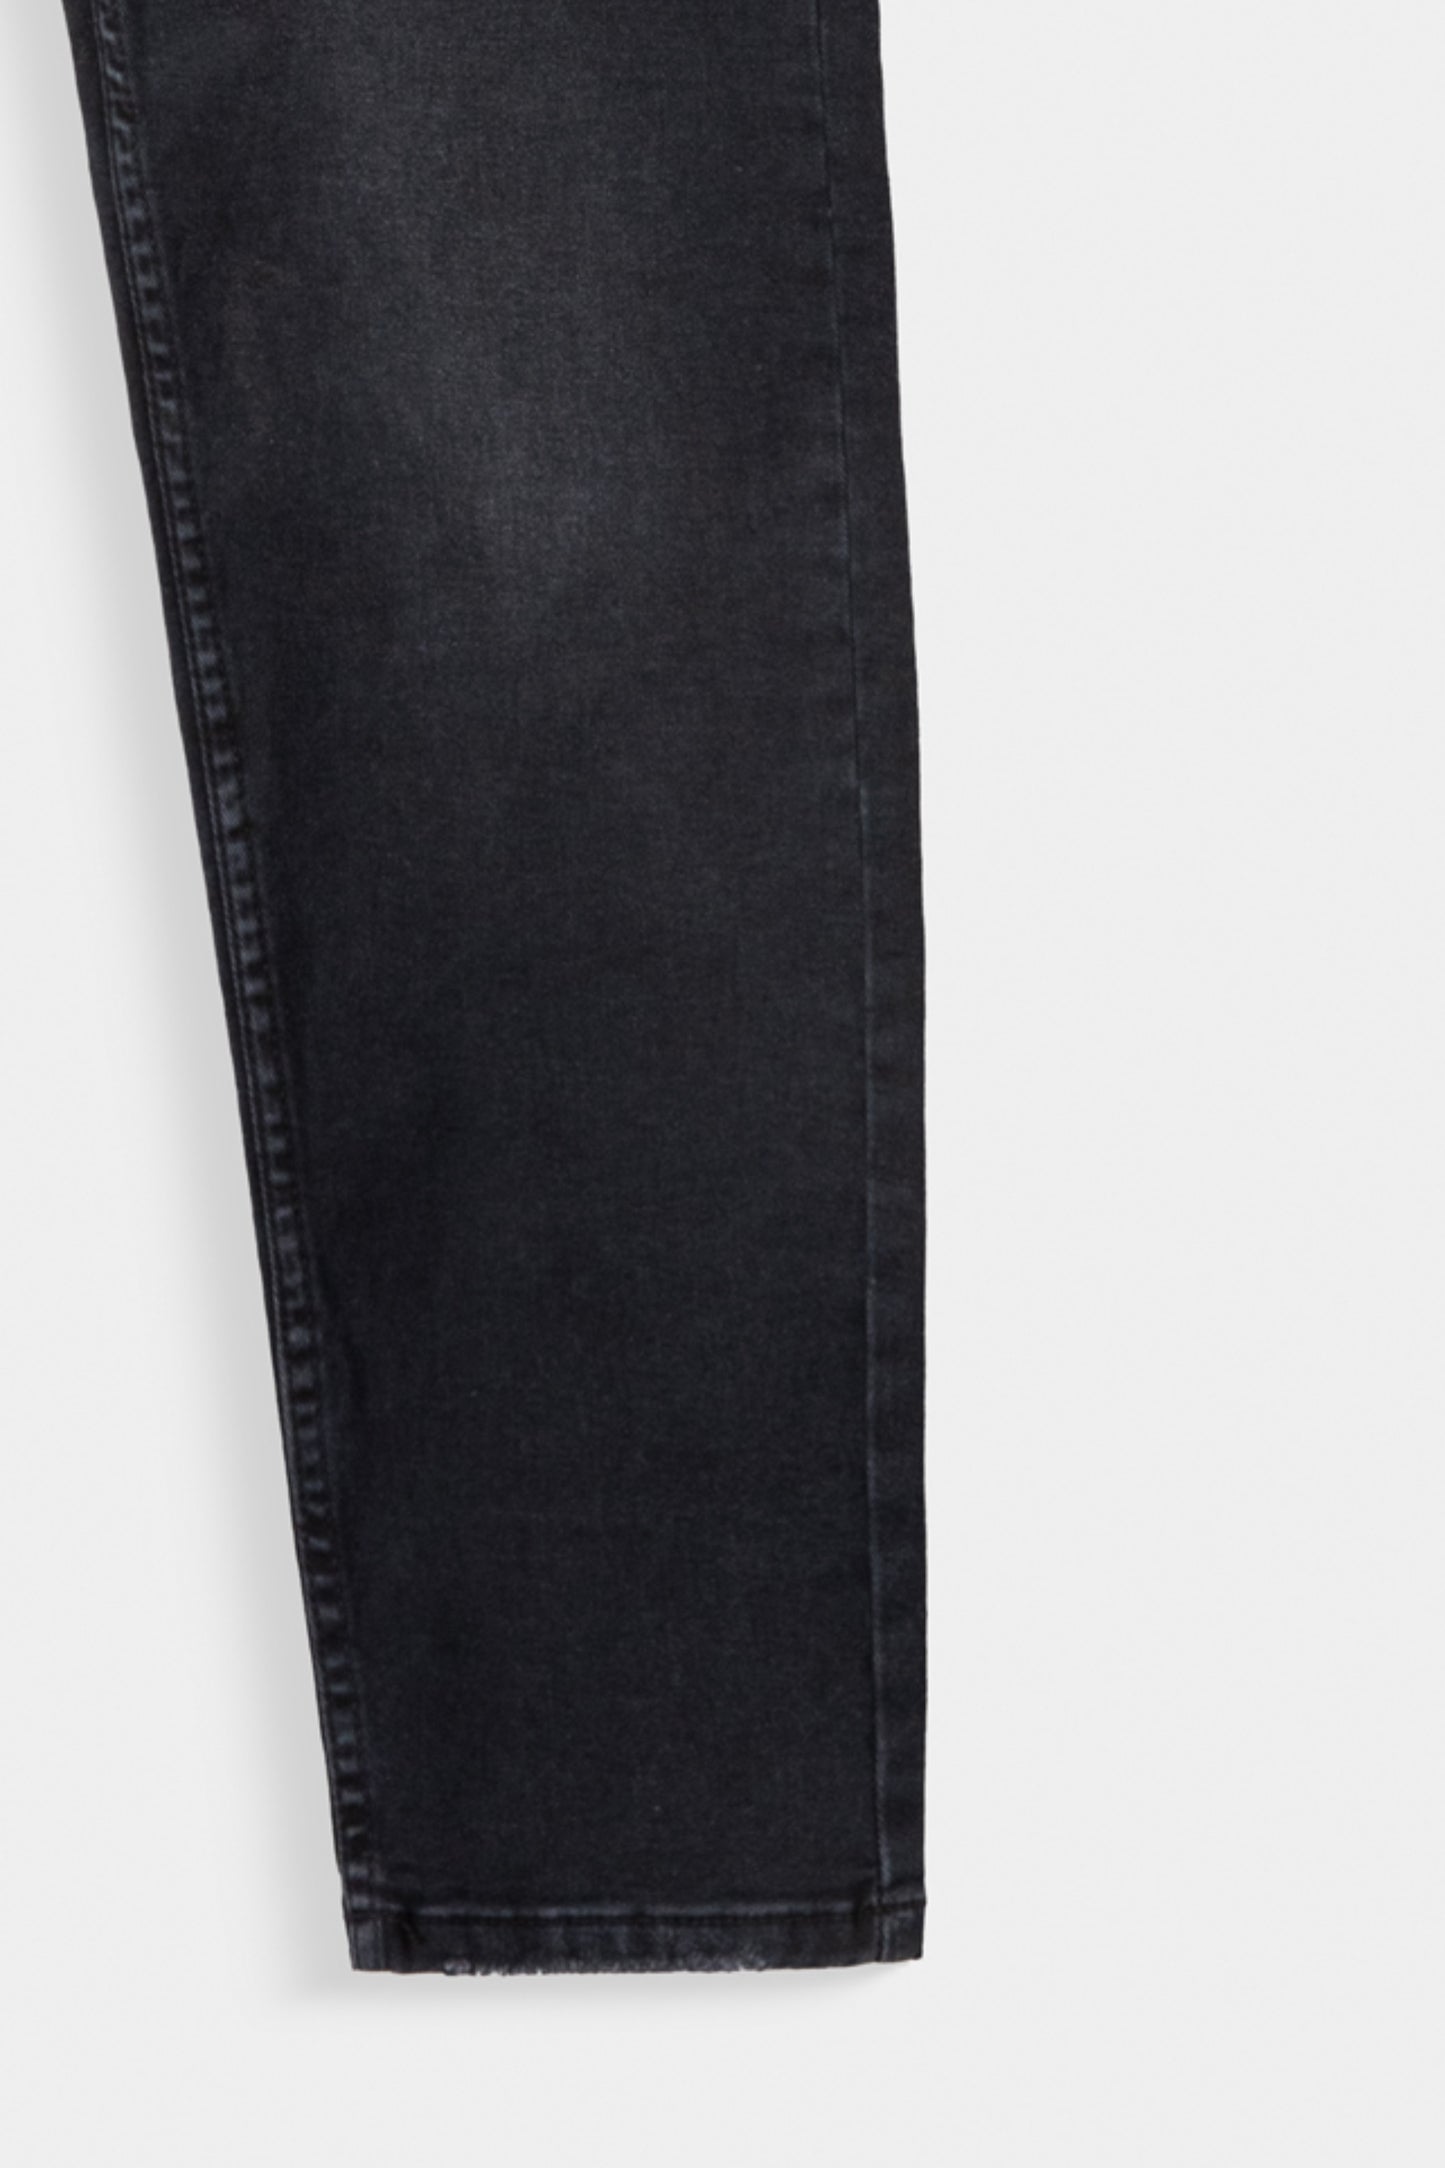 Faded Slim Cropped Jeans